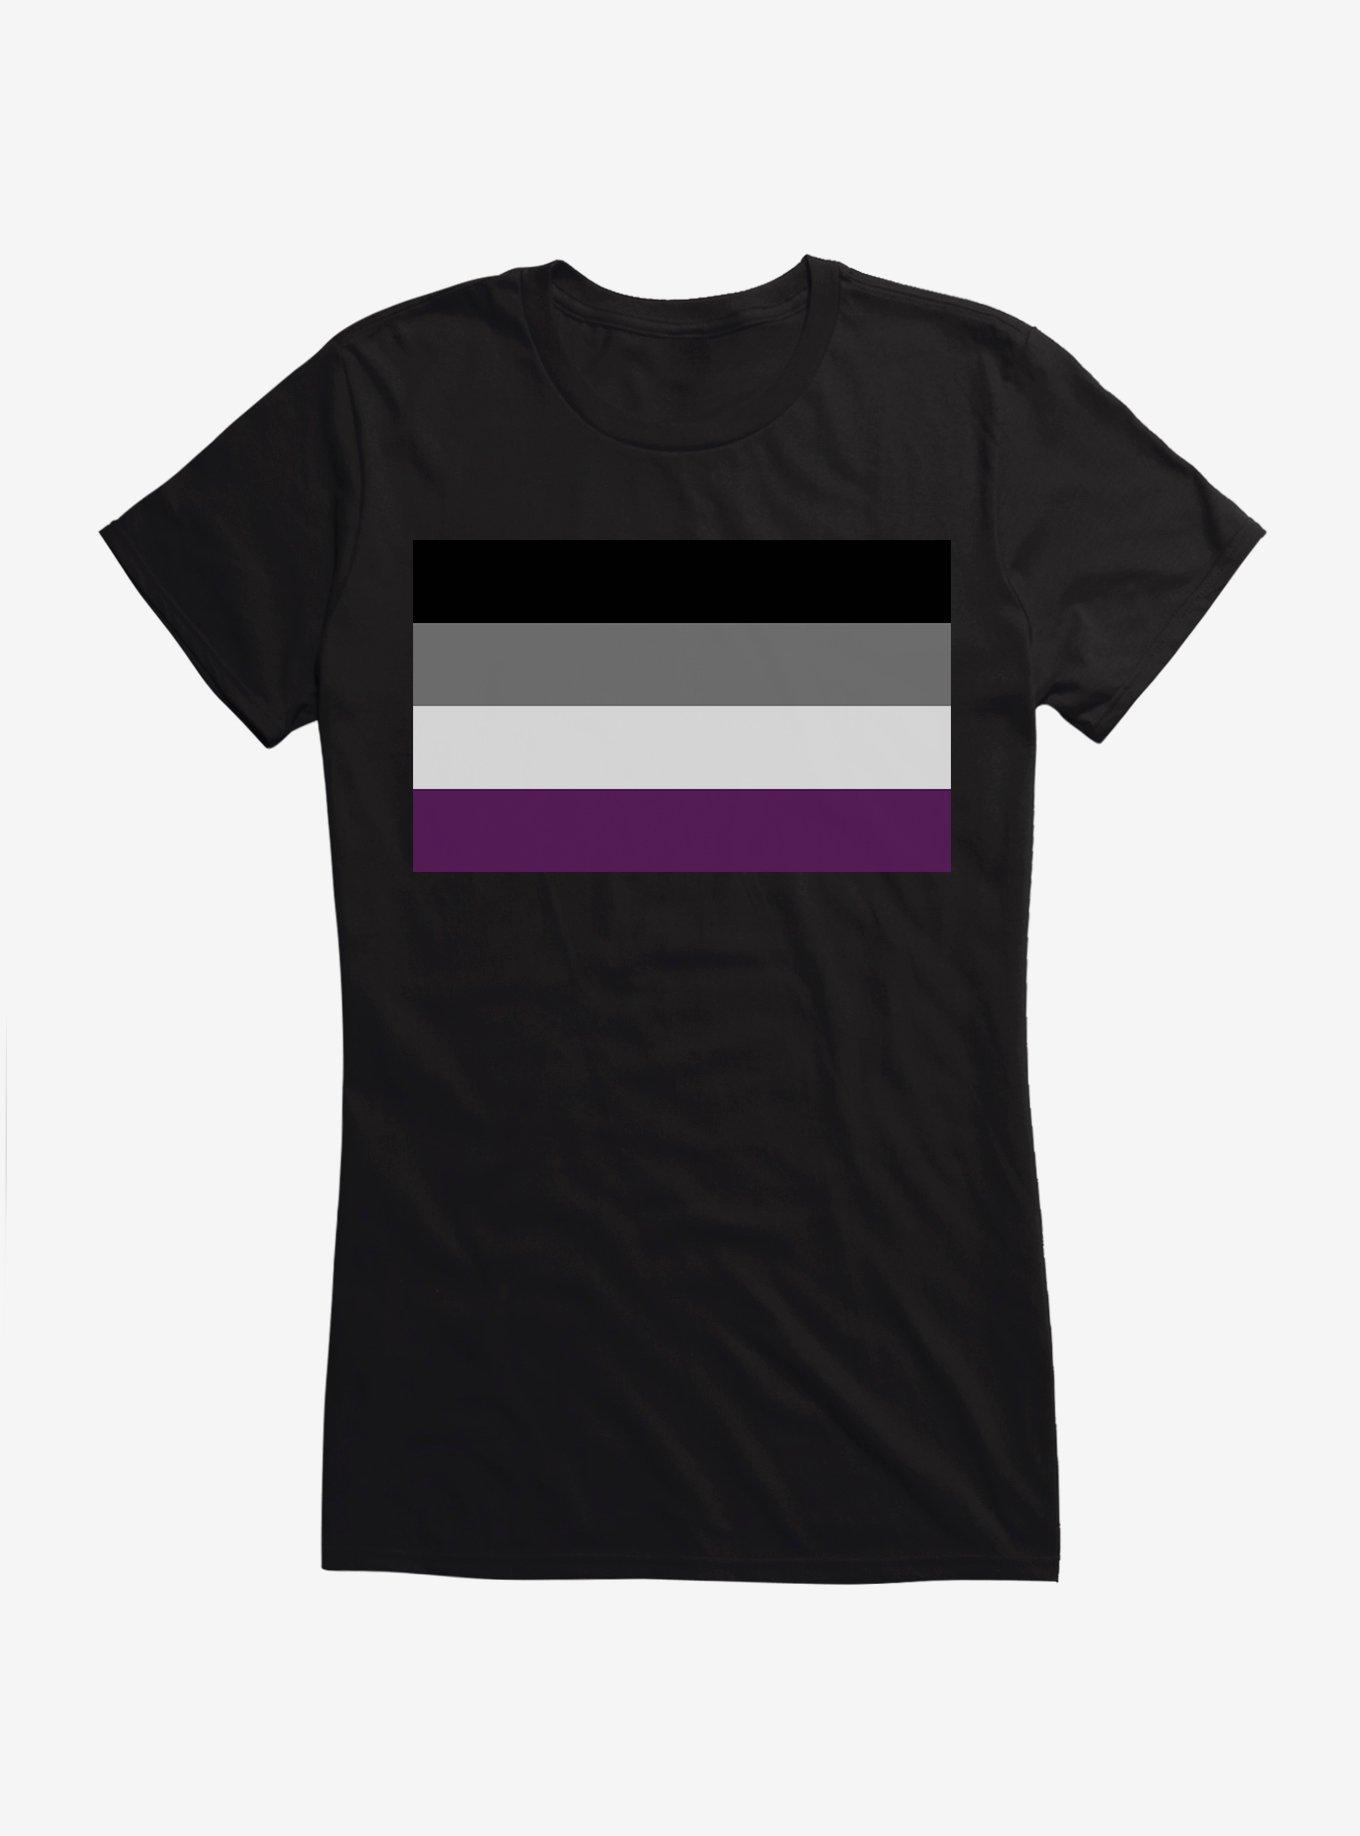 Pride Asexual Flag Girls T-Shirt | Hot Topic